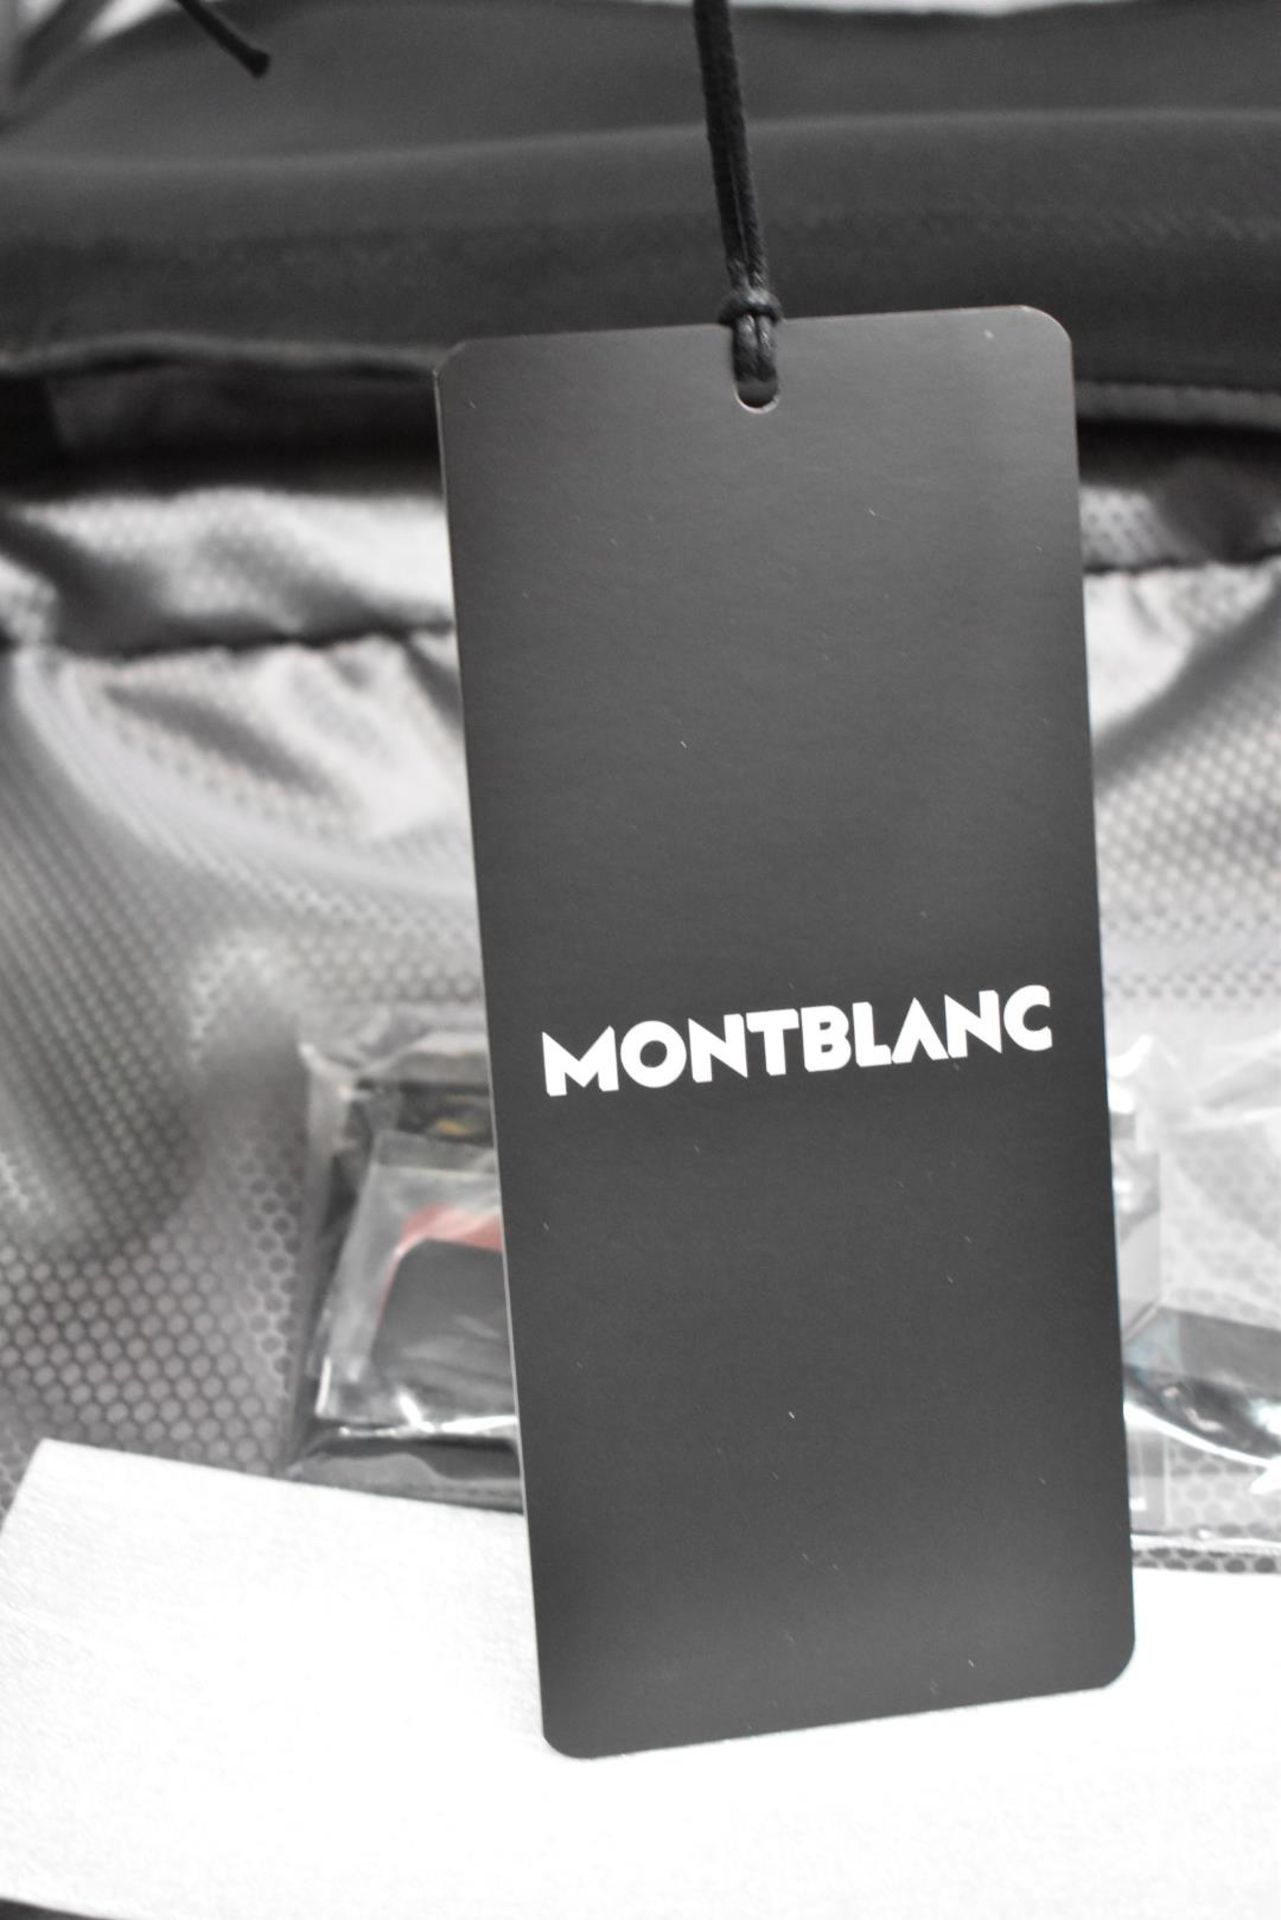 1 x MONTBLANC Polycarbonite Hand Luggage Cabin Trolley (55cm) - Original RRP £690.00 - Image 23 of 26